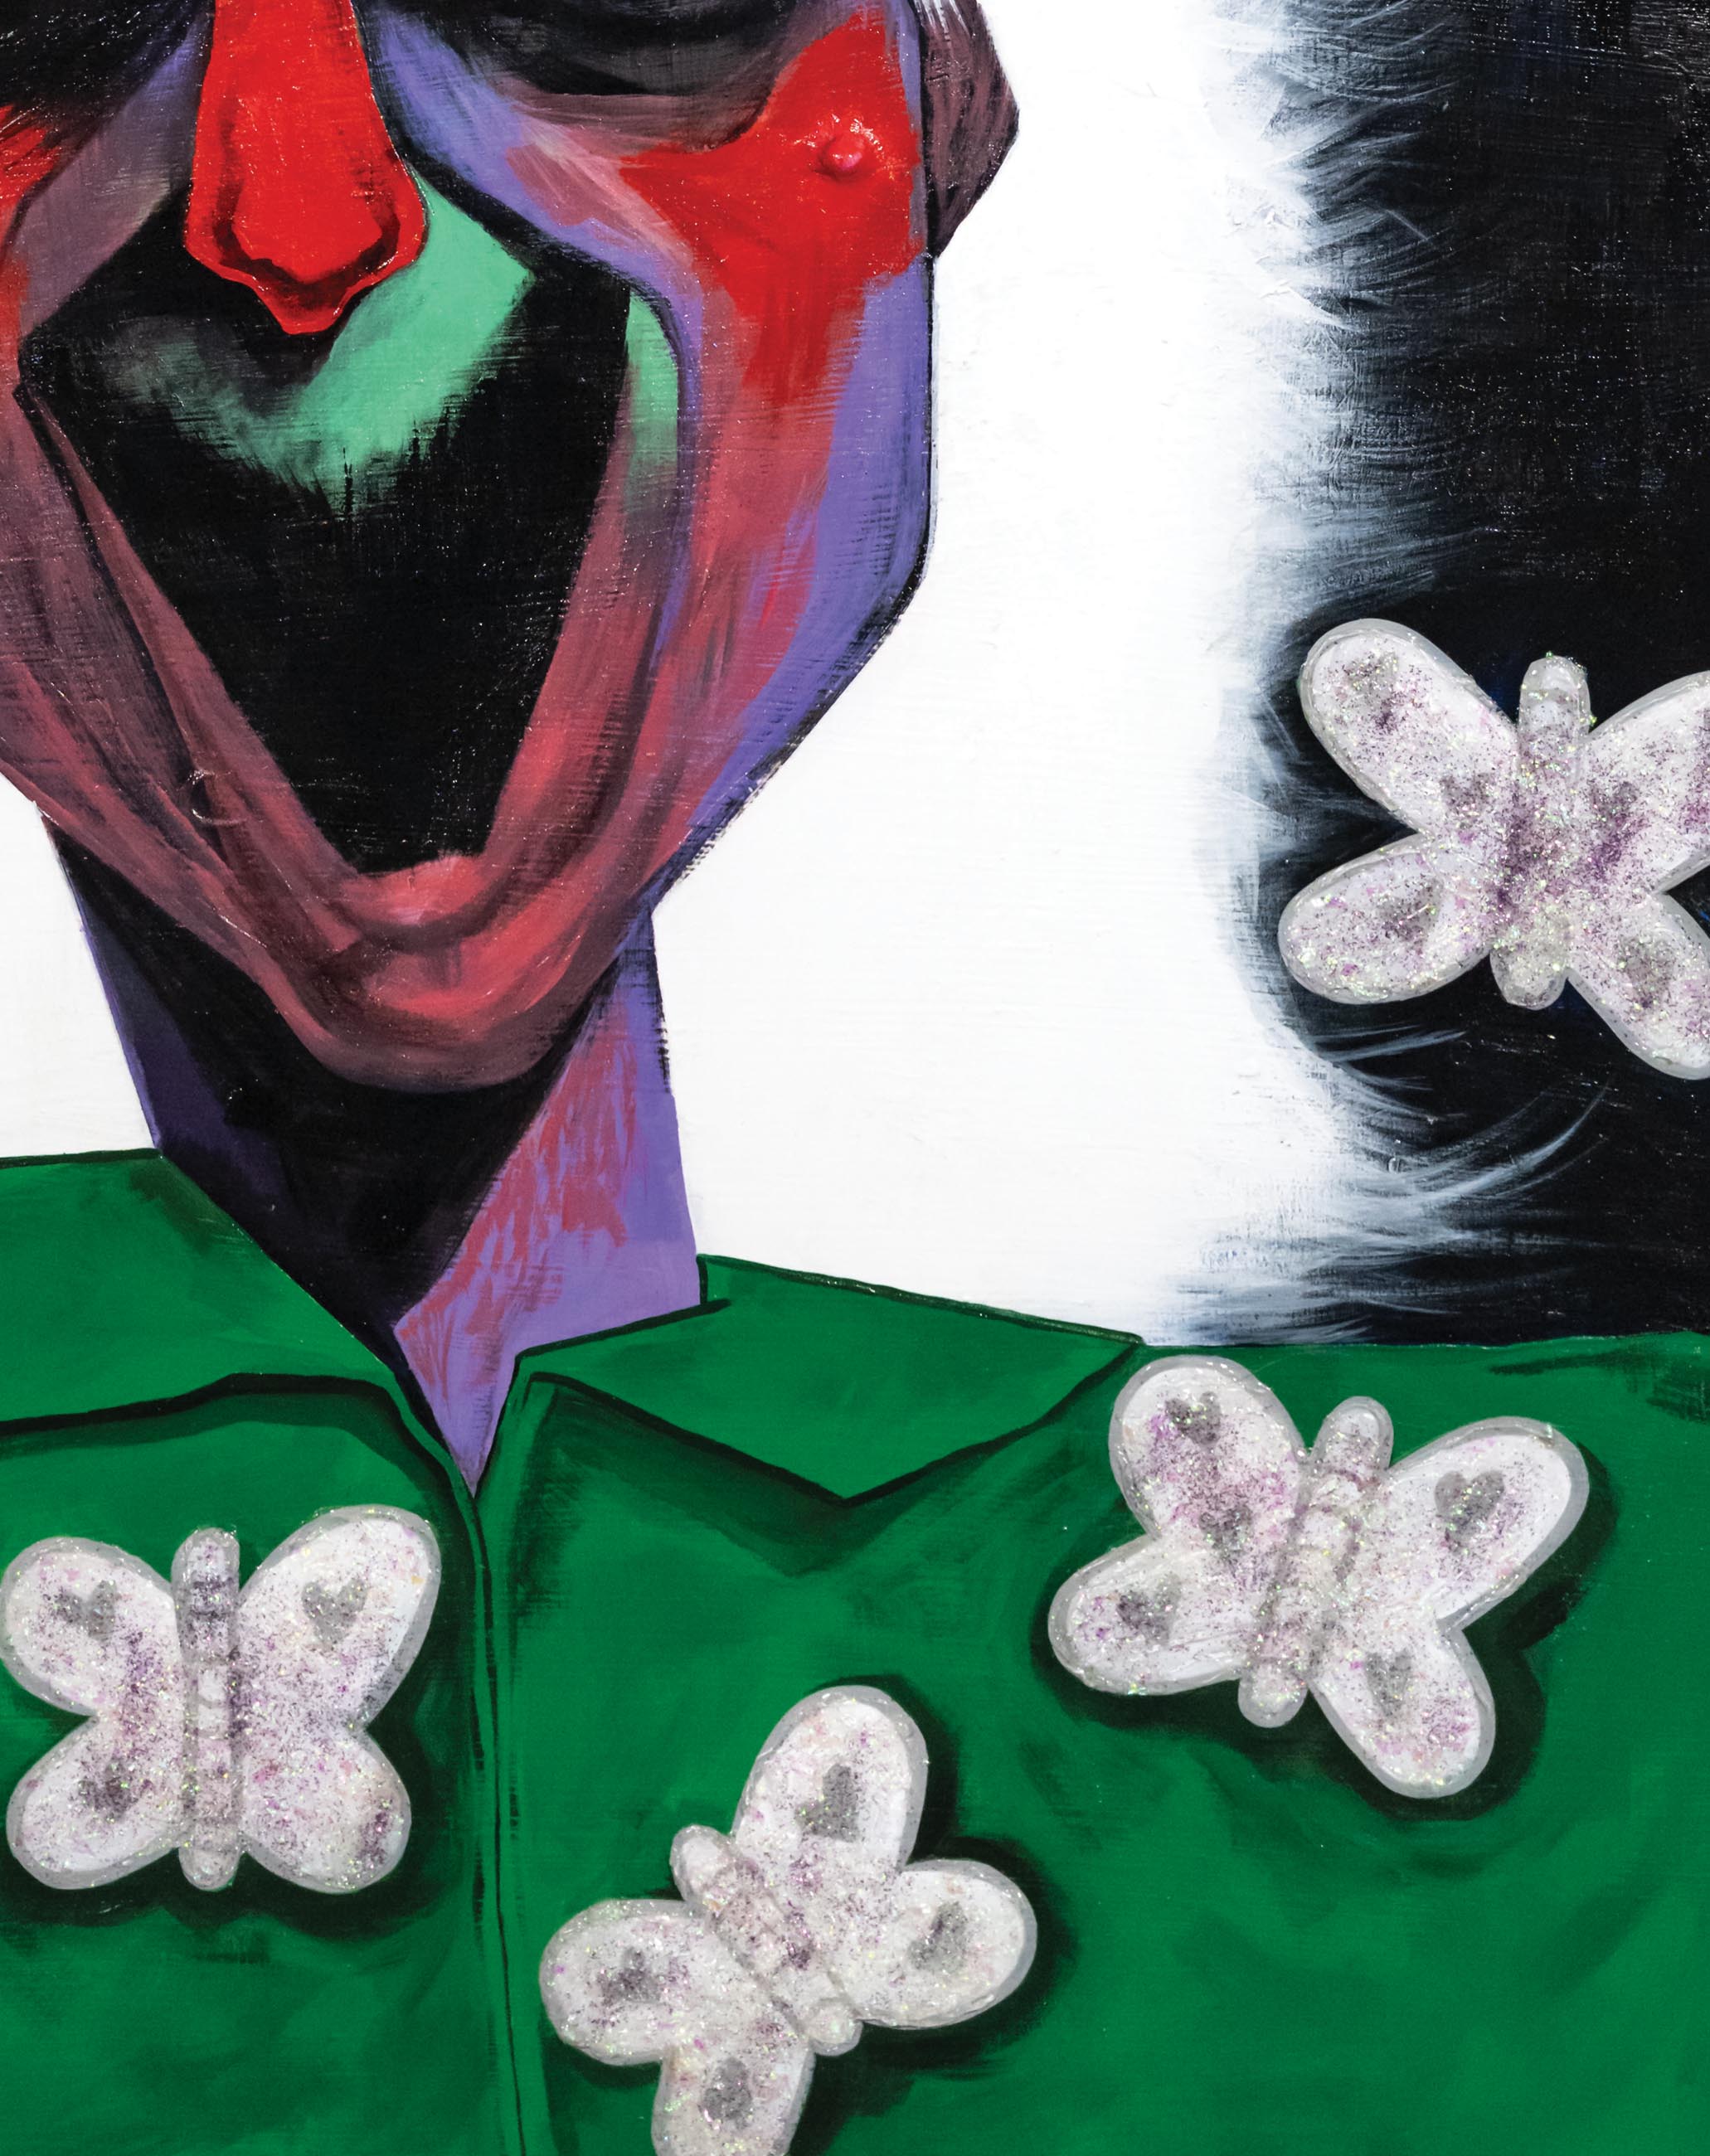 painting detail with purple-faced person in green shirt with sparkly white moths encircling neck